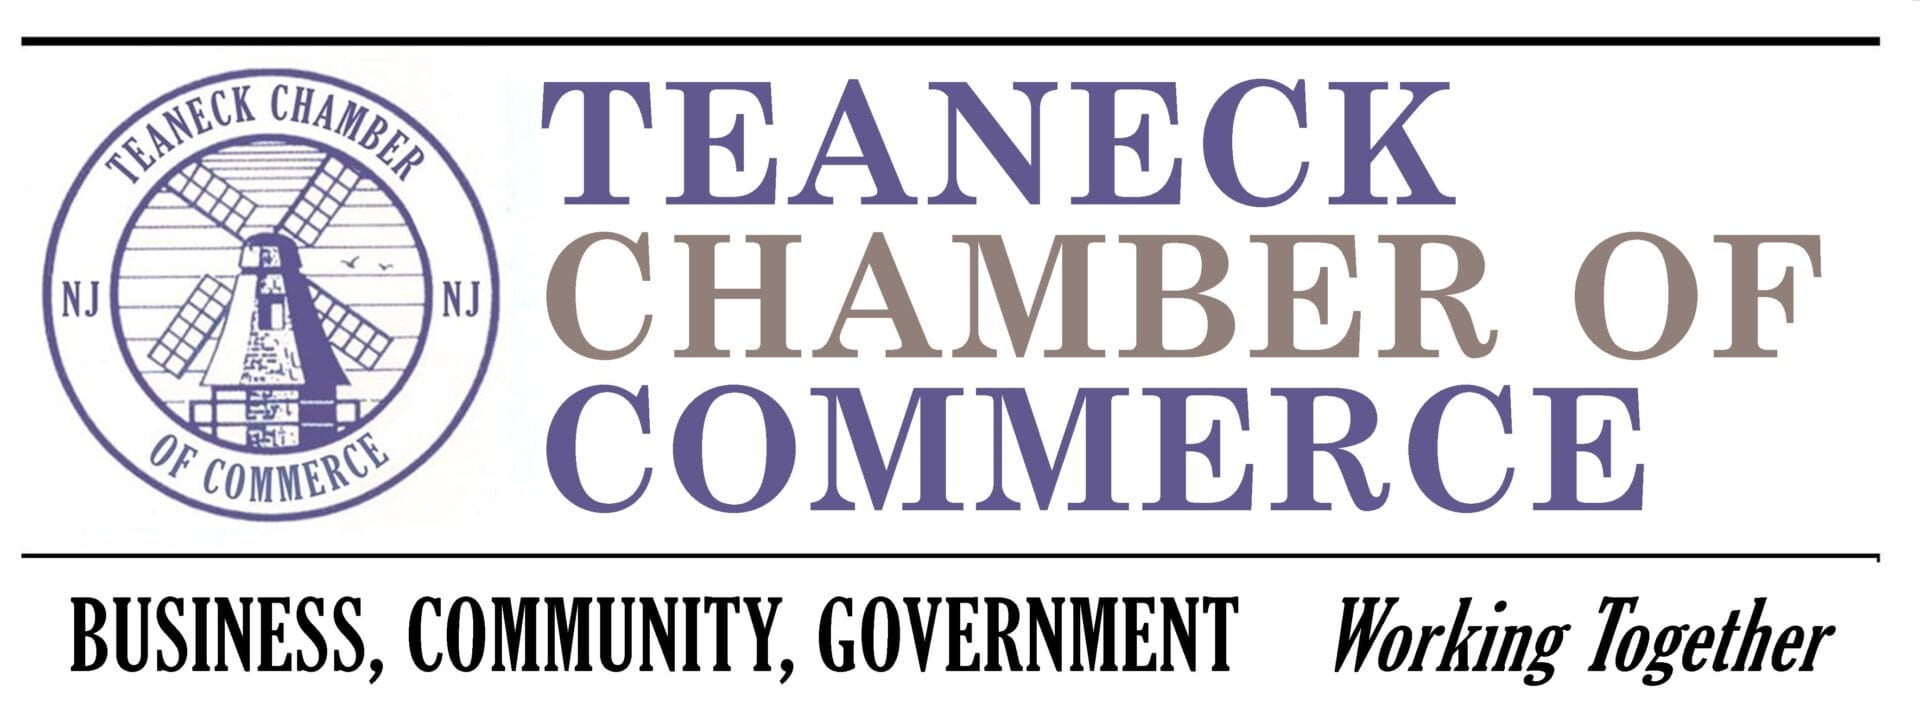 Teaneck Chamber of Commerce in New Jersey